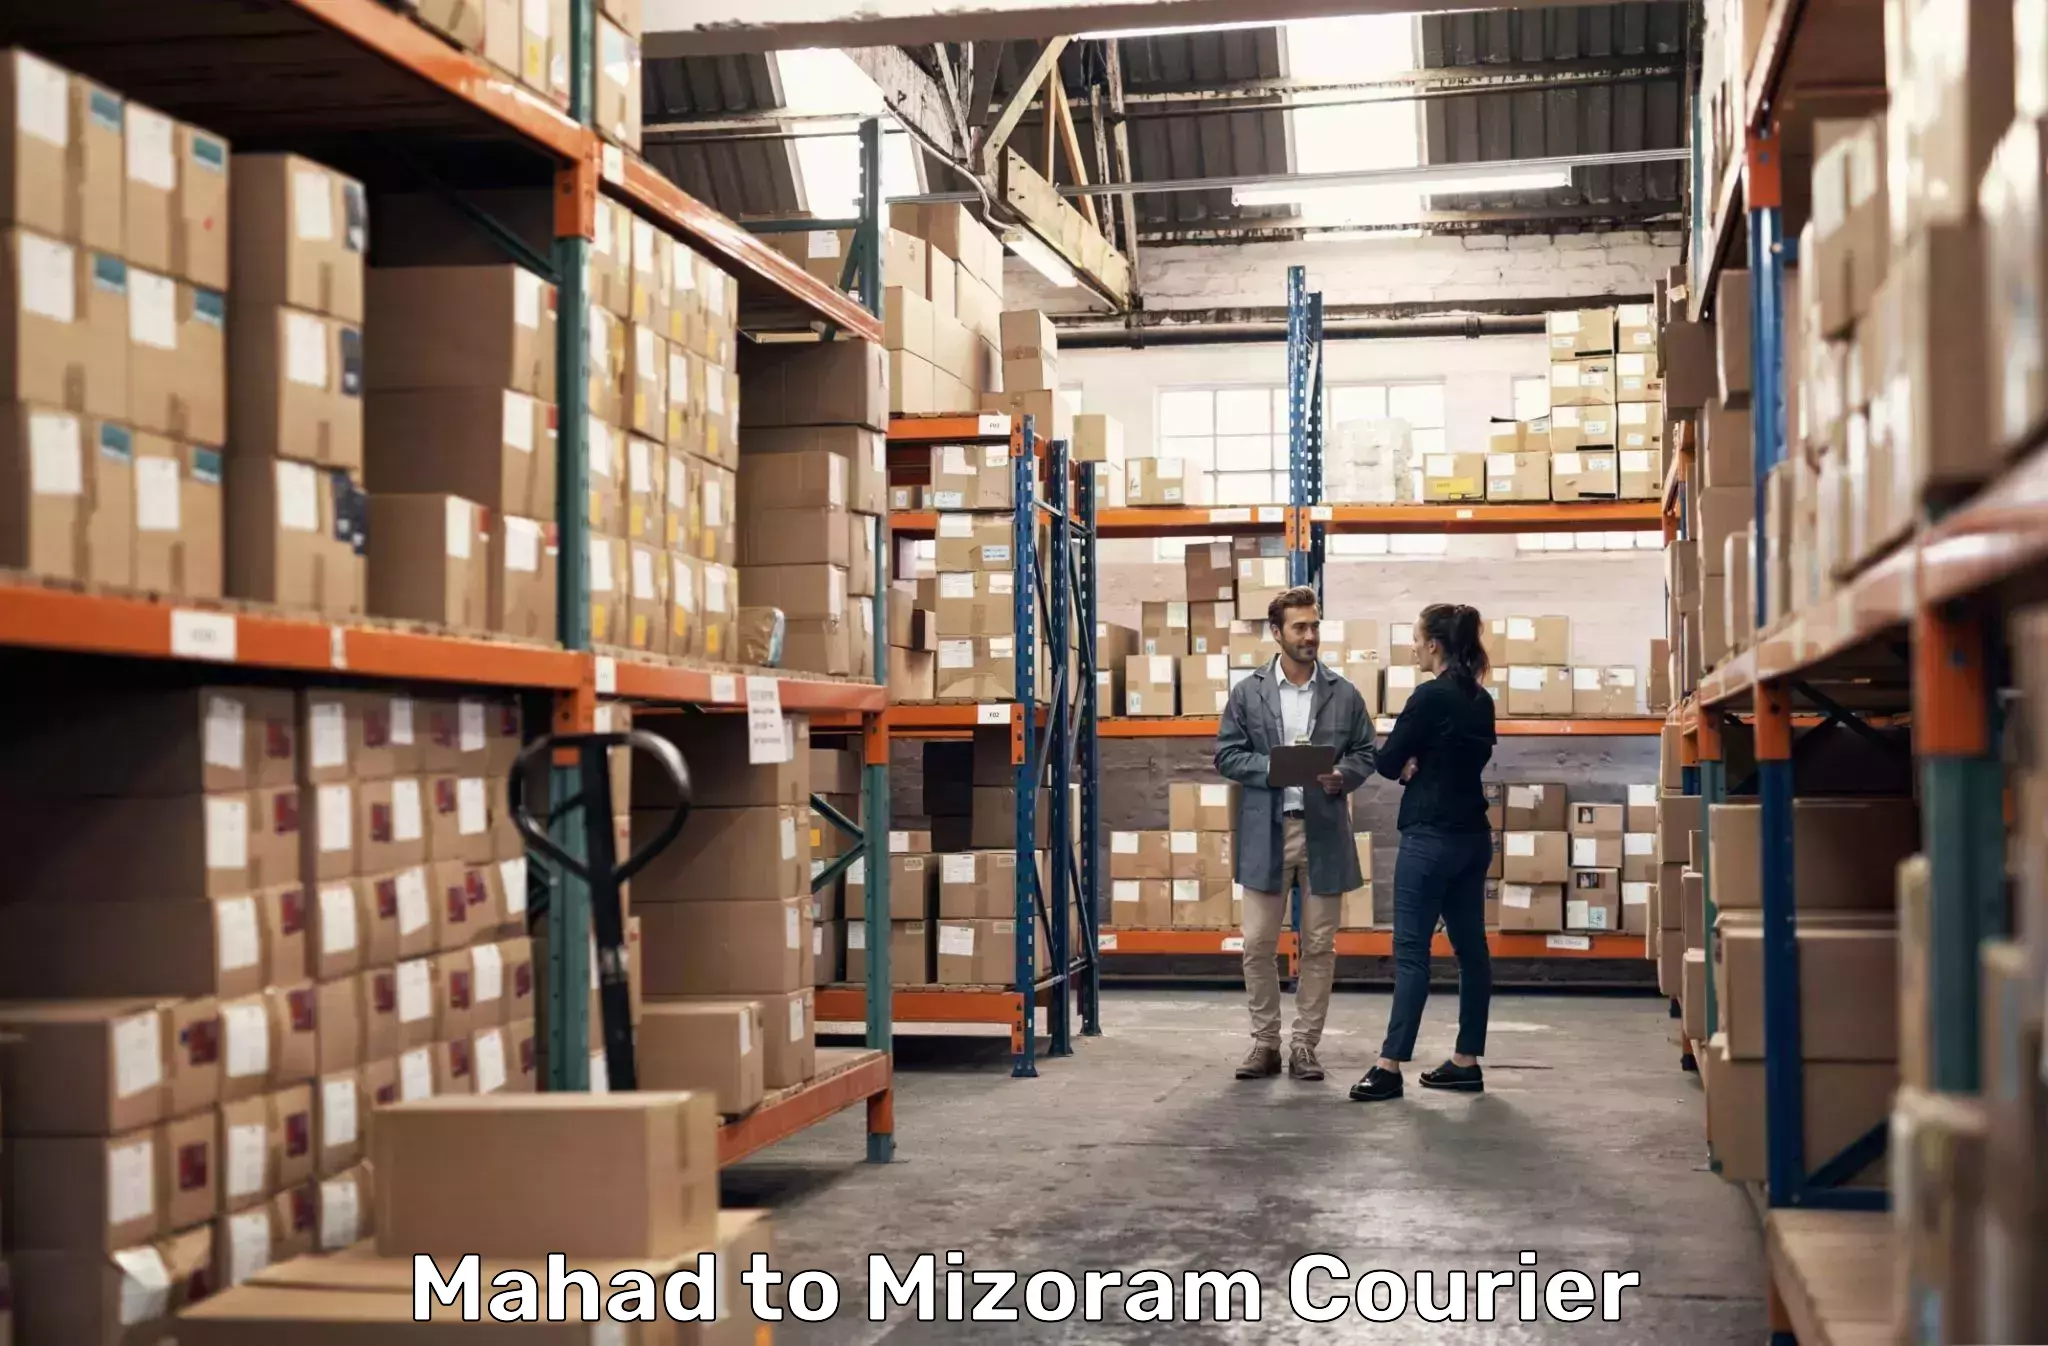 Global courier networks Mahad to Mizoram